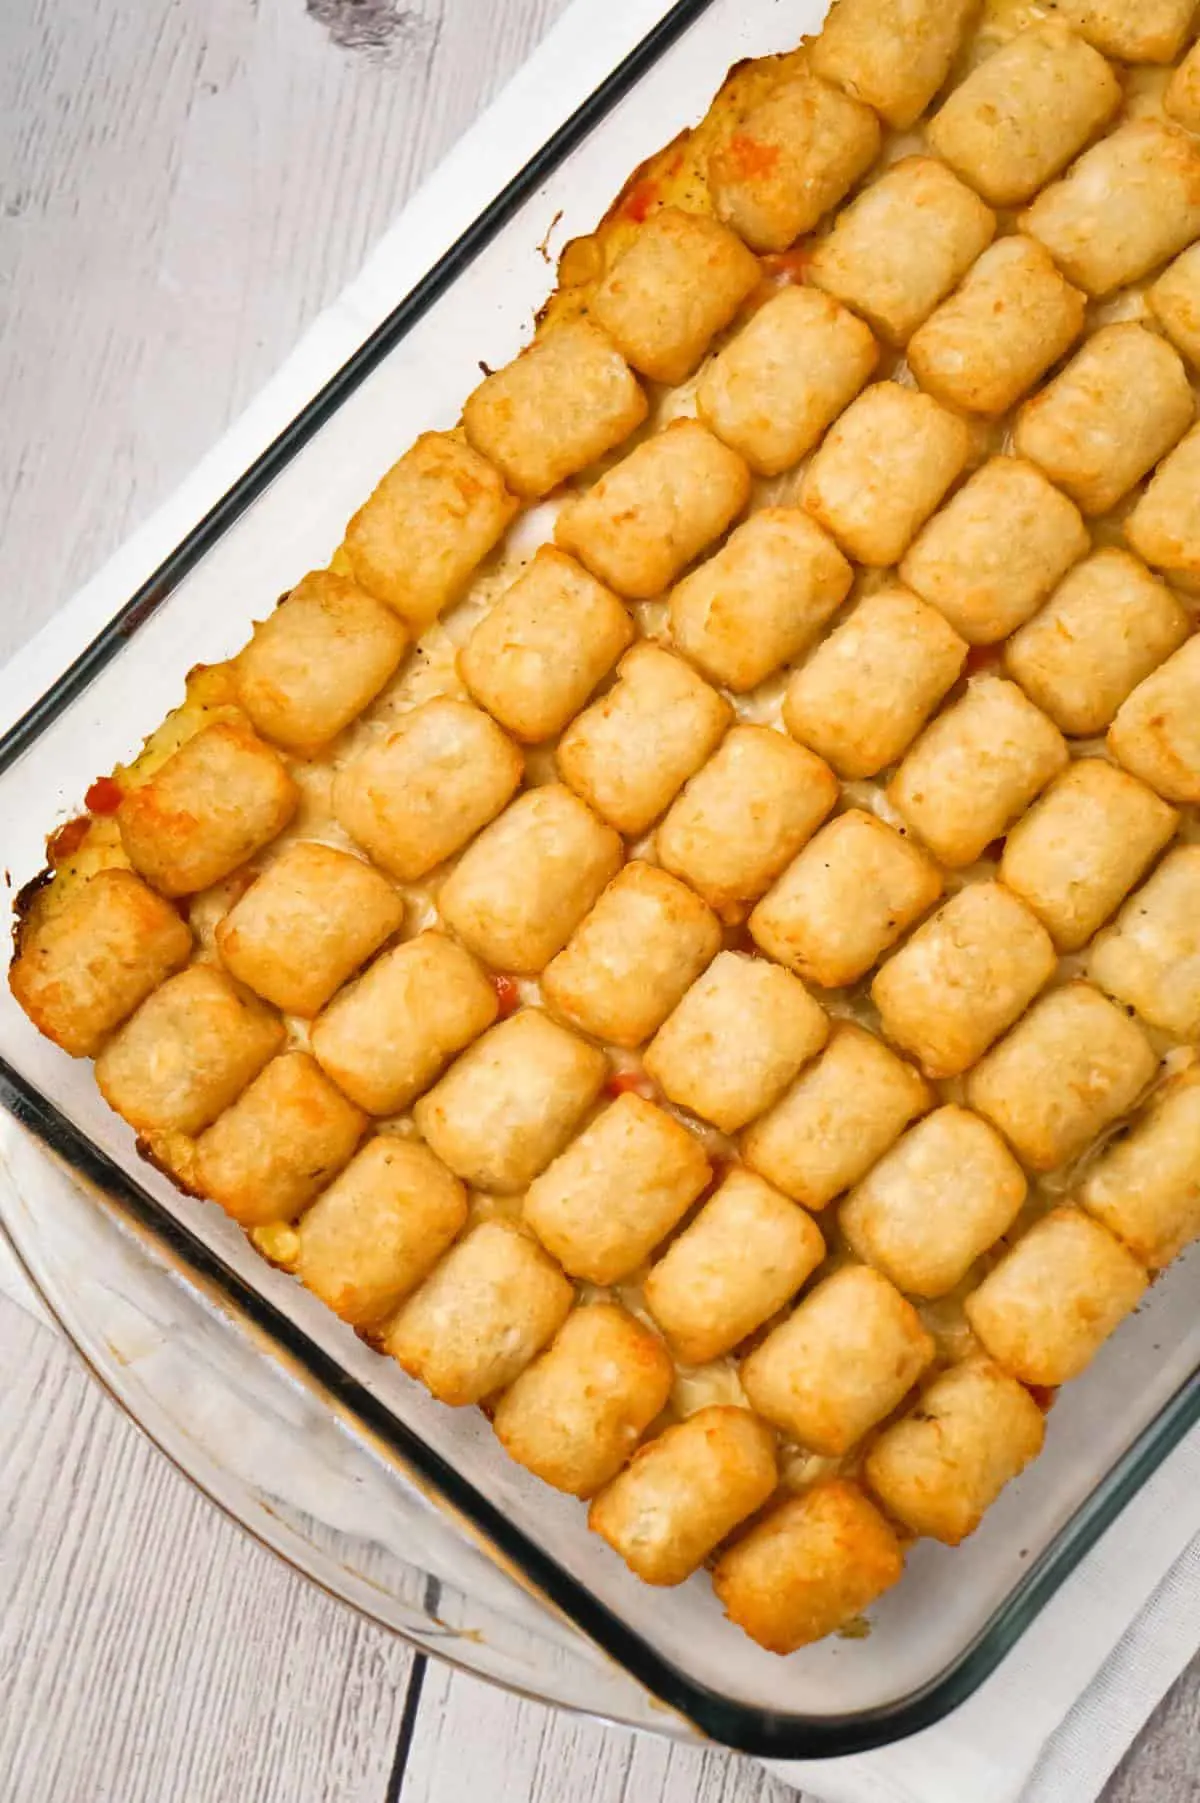 Chicken Pot Pie Tater Tot Casserole is an easy dinner recipe using shredded rotisserie chicken tossed with cream of chicken soup and mixed veggies all topped with tater tots.